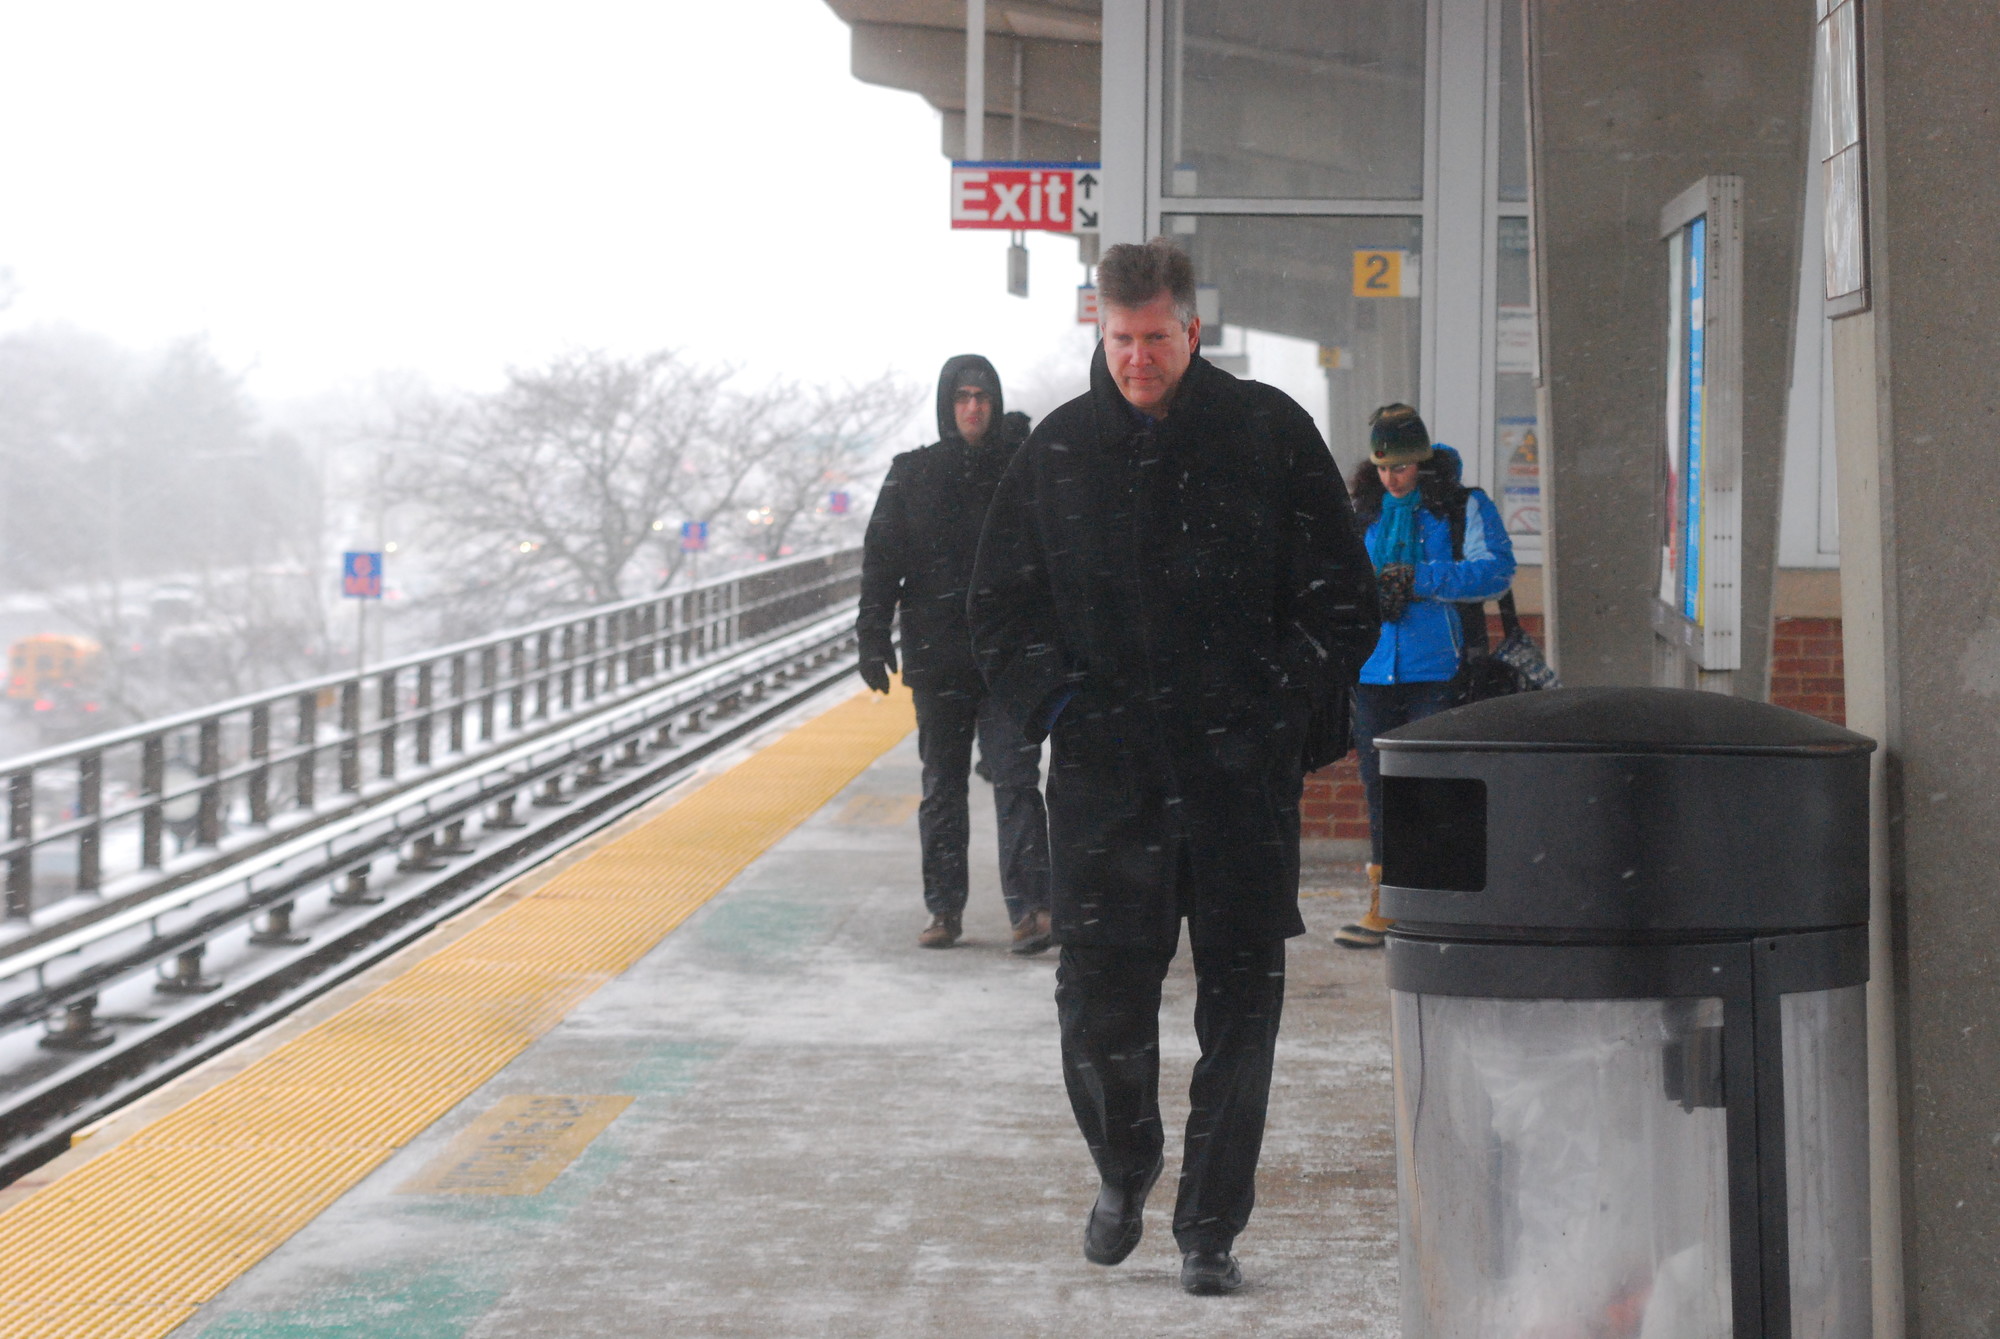 Snow started to fall early on Monday morning. By Monday evening, blizzard conditions were expected across Long Island. Above, commuters at the Merrick Long Island Rail Road station at 8 a.m. on Monday.